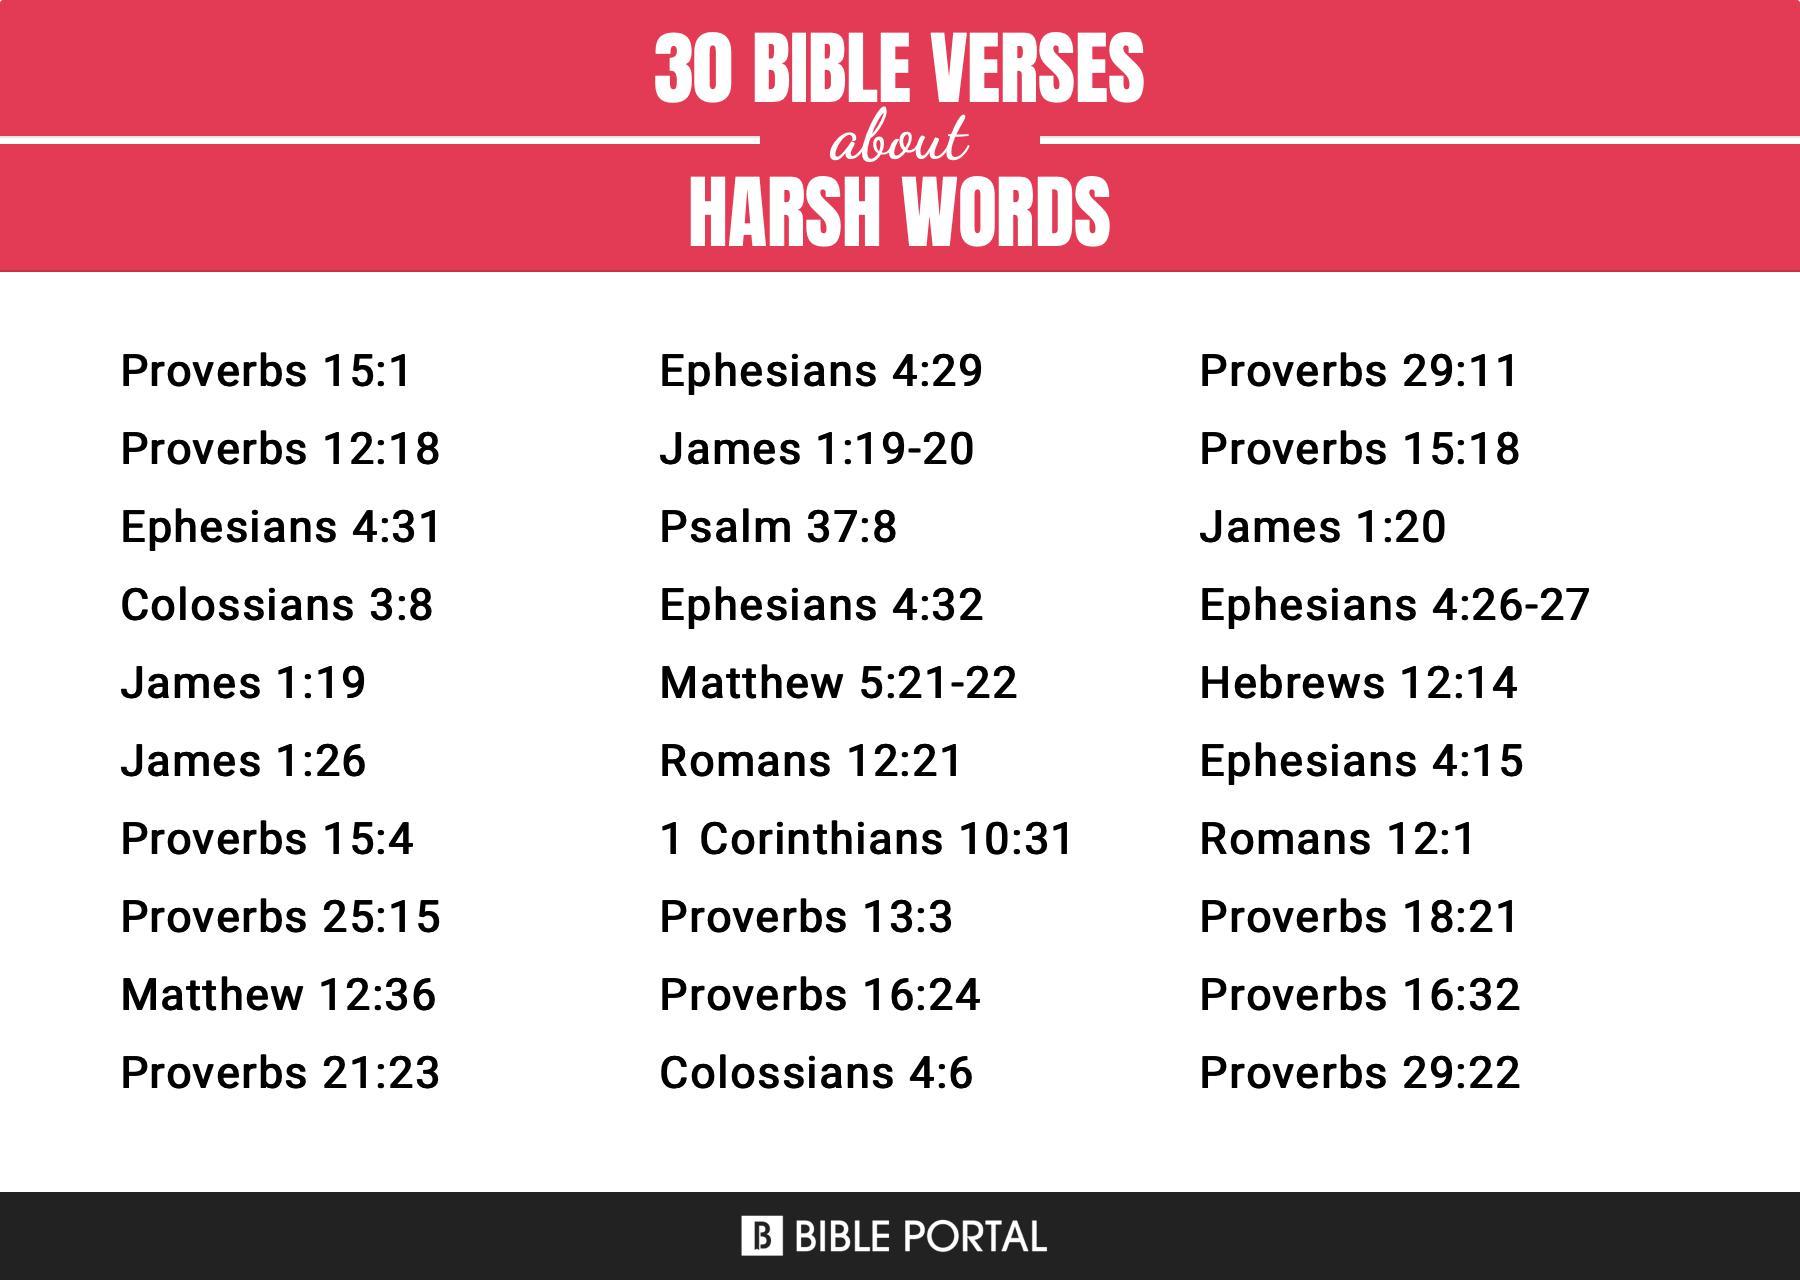 What Does the Bible Say about Harsh Words?